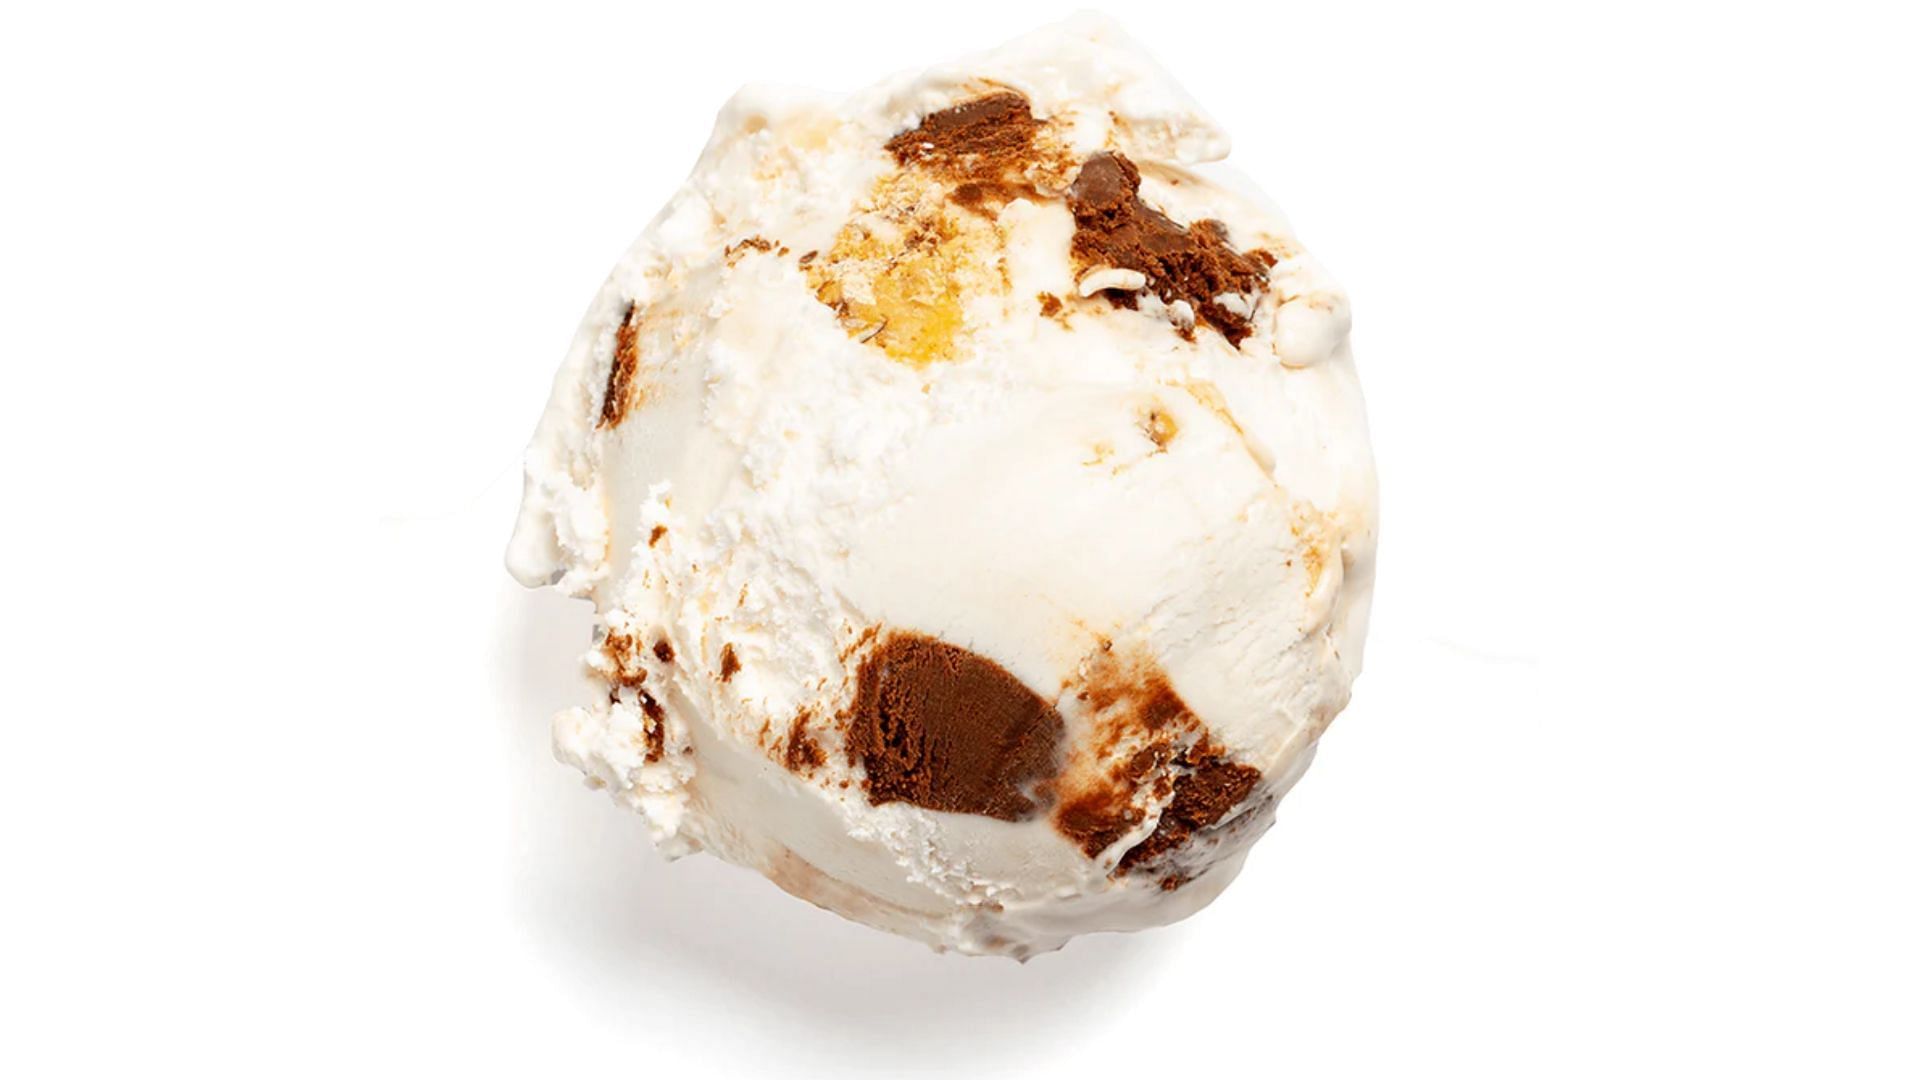 promotional image for the Almond Brittle with Salted Ganache ice cream (Image via Salt &amp; Straw)